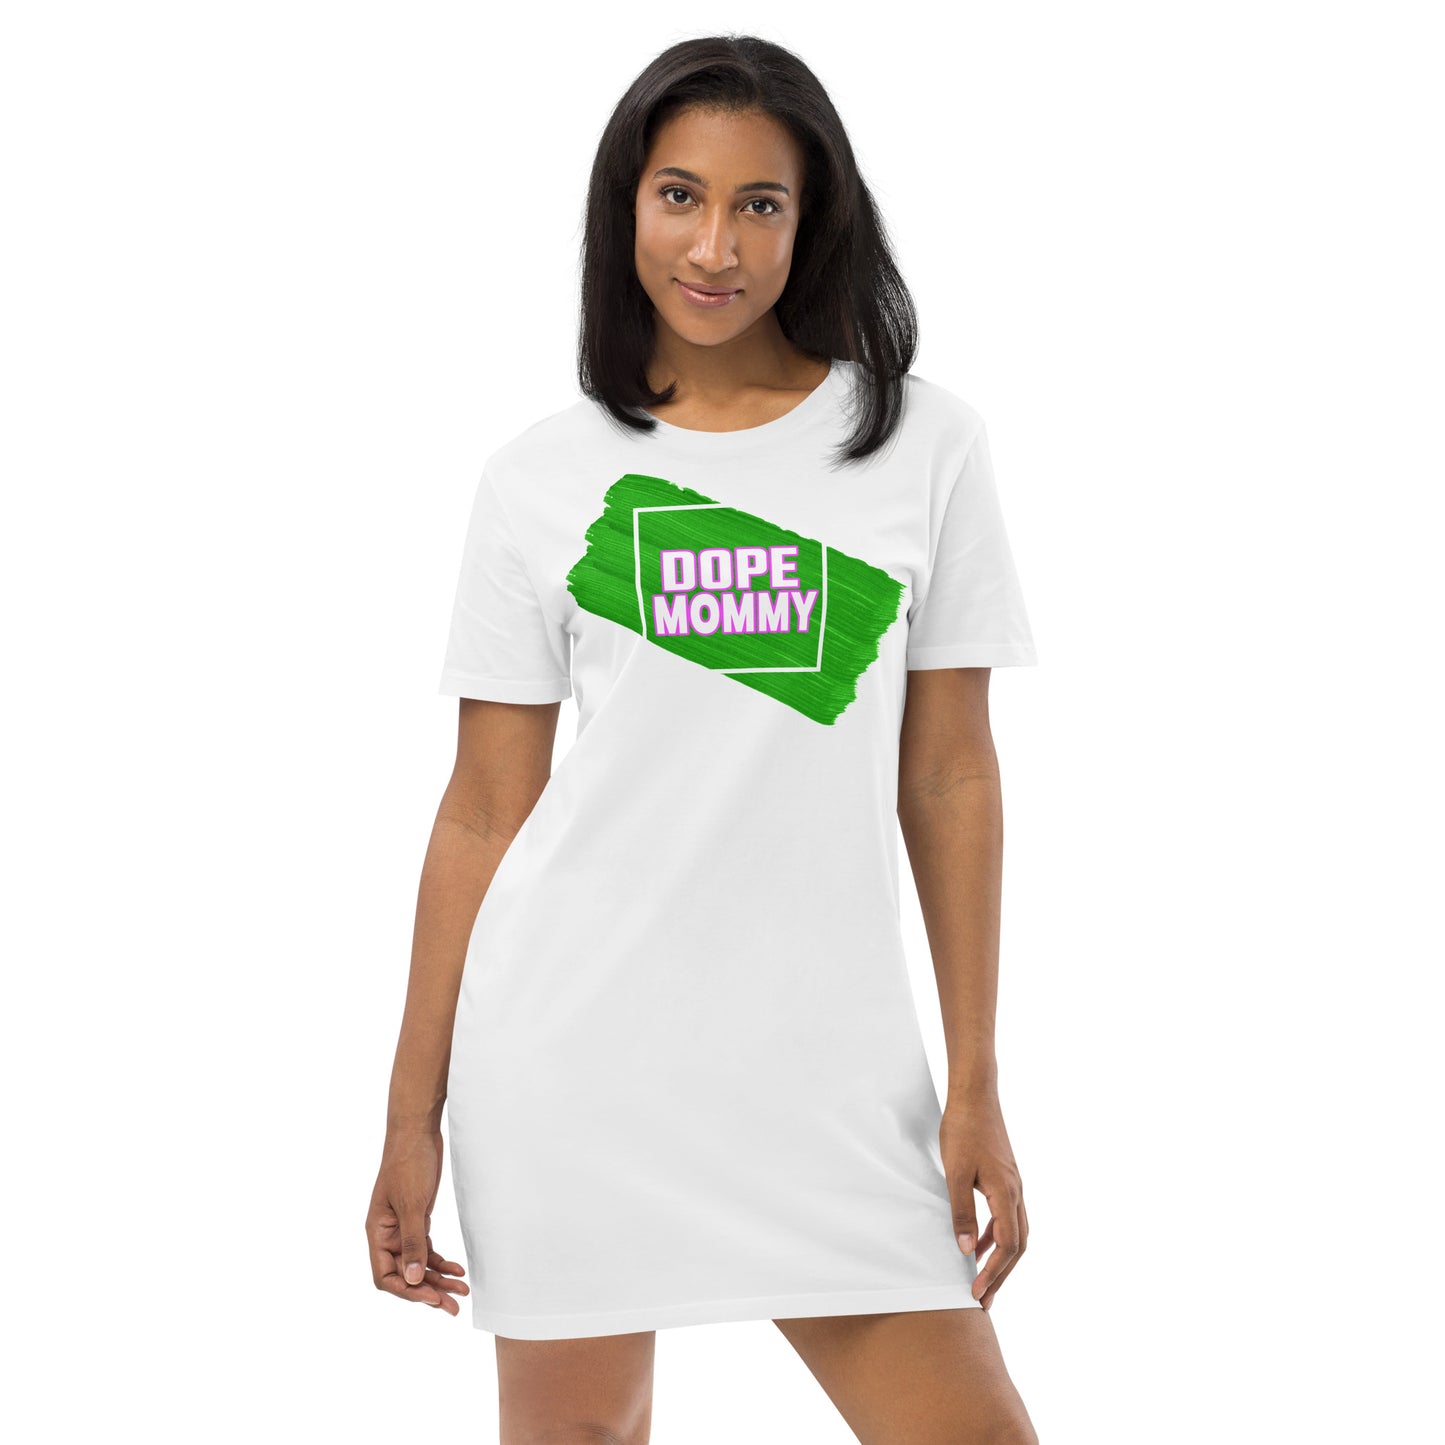 Adult "Dope Mommy" T-shirt Dress